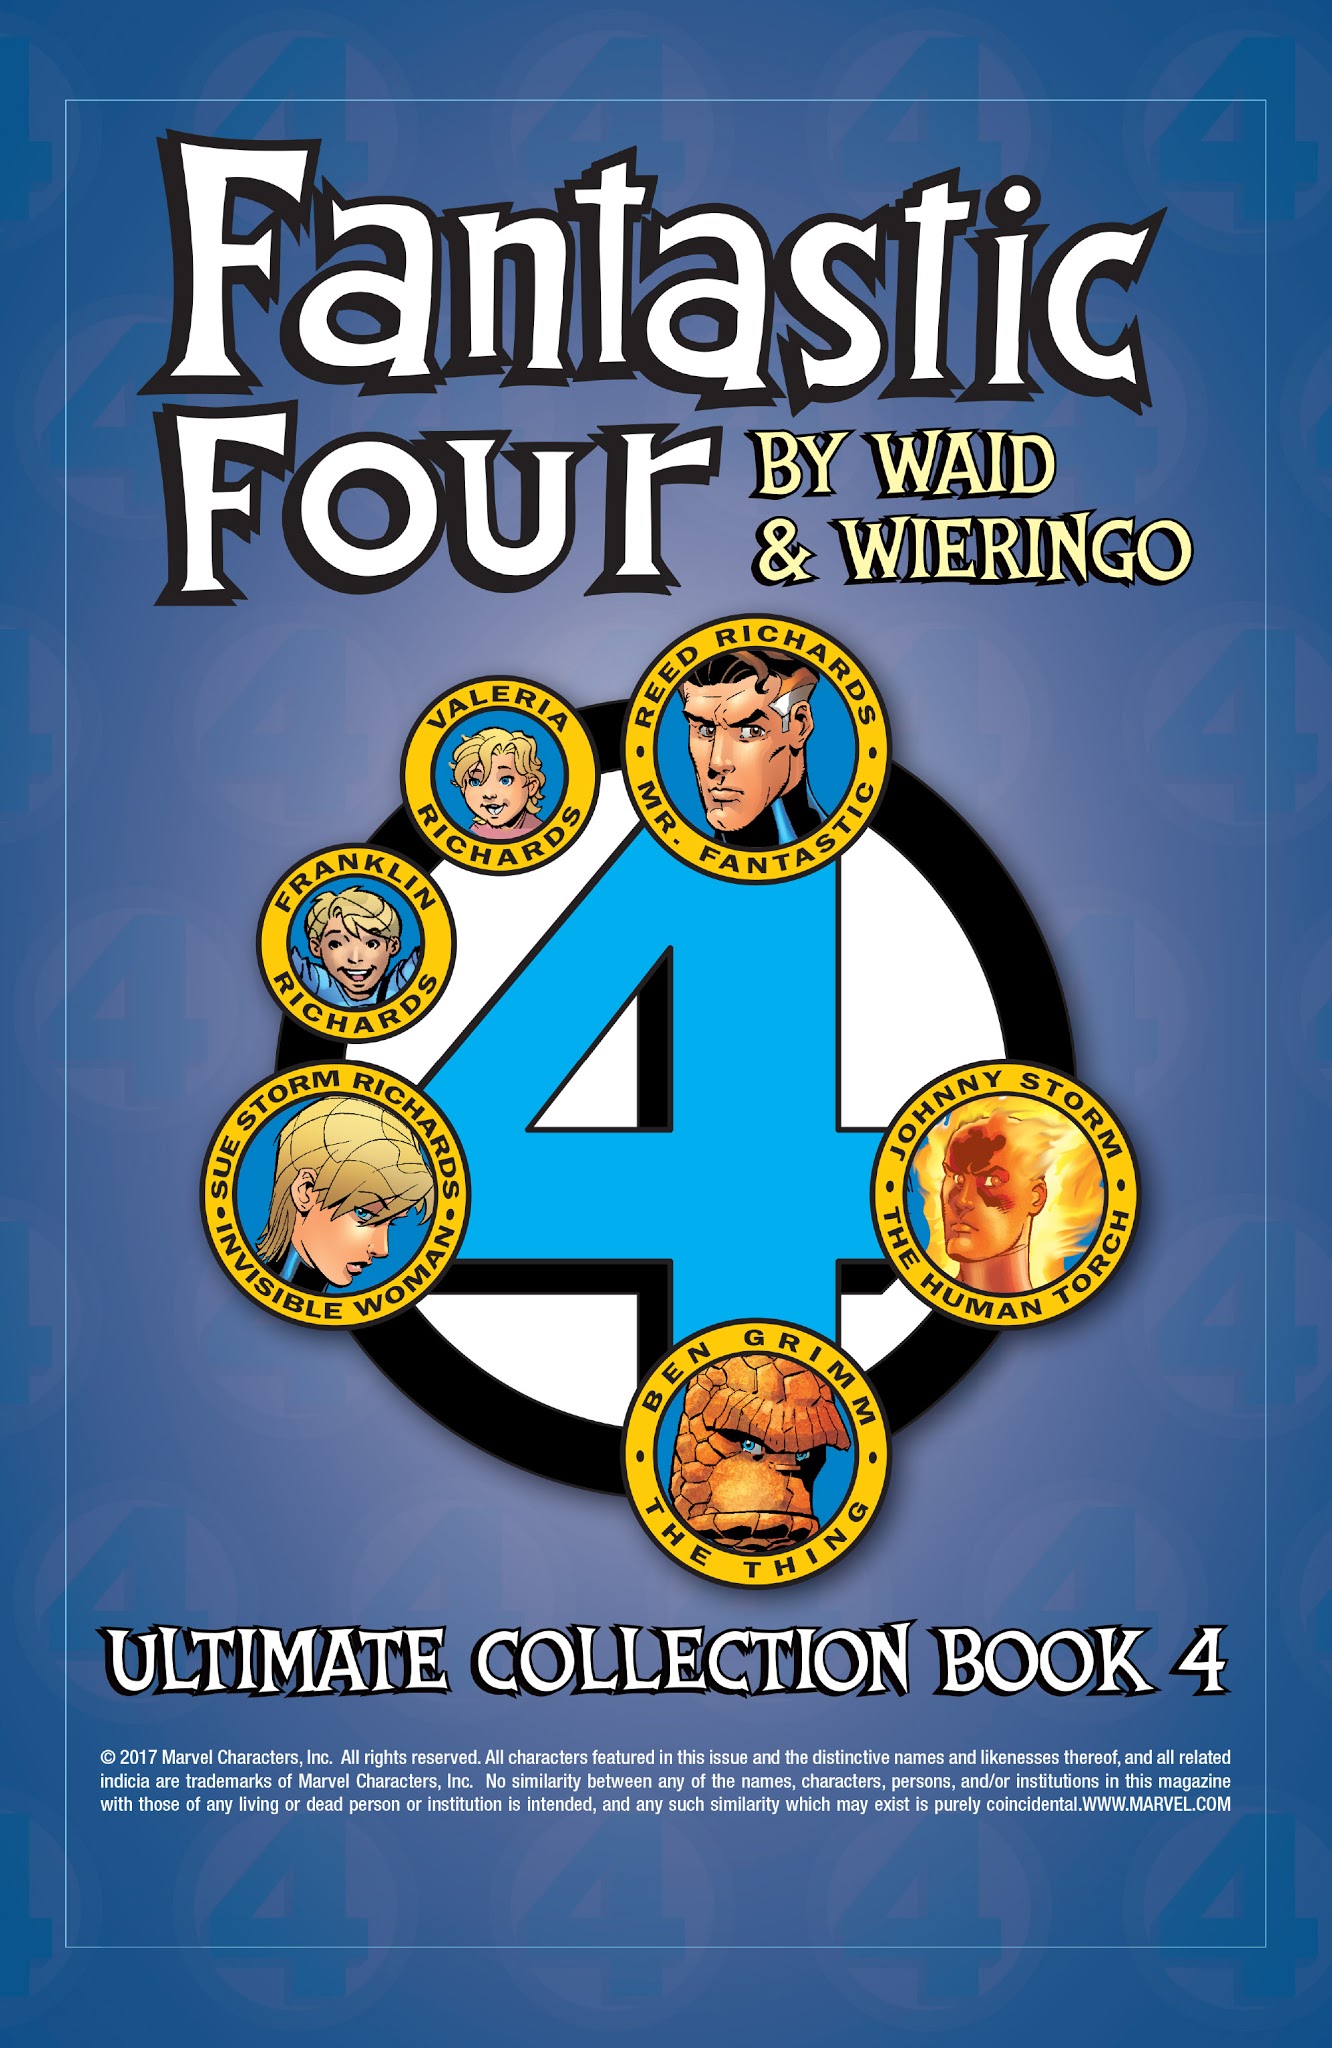 Read online Fantastic Four by Waid & Wieringo Ultimate Collection comic -  Issue # TPB 4 - 2